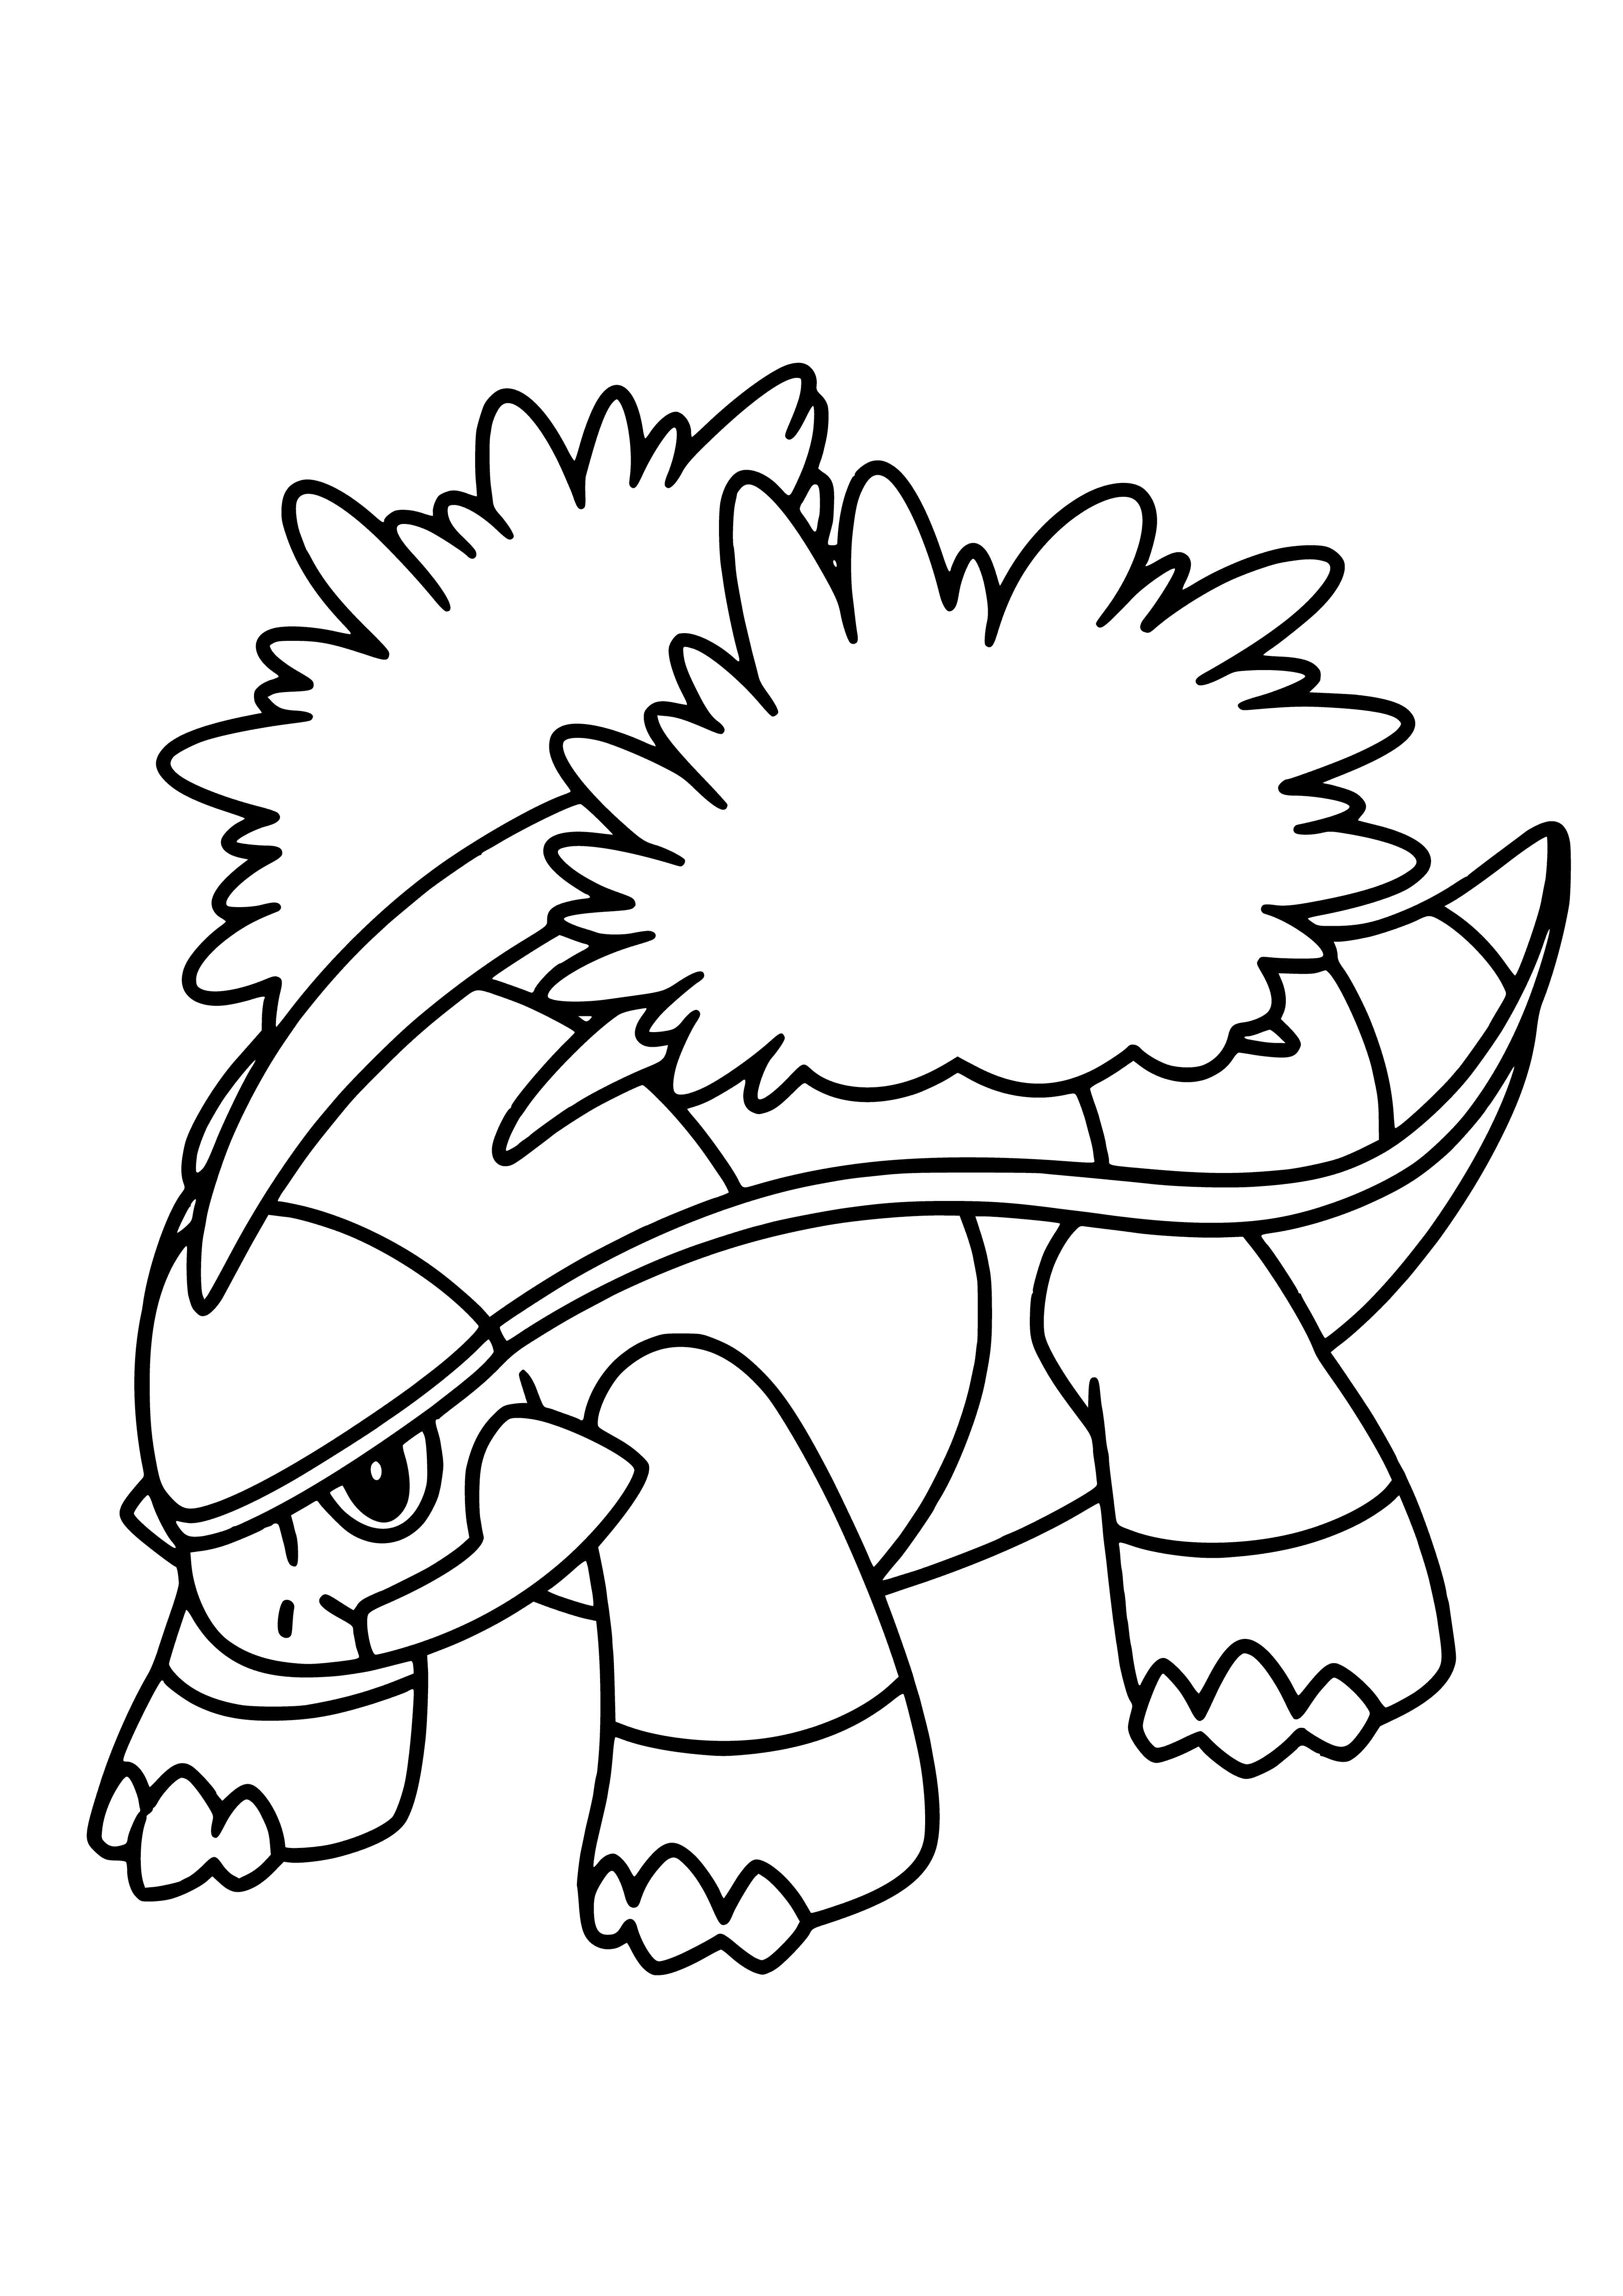 coloring page: Large, green Pokémon with brown shell, wide head, strong arms/legs, big hands/feet.